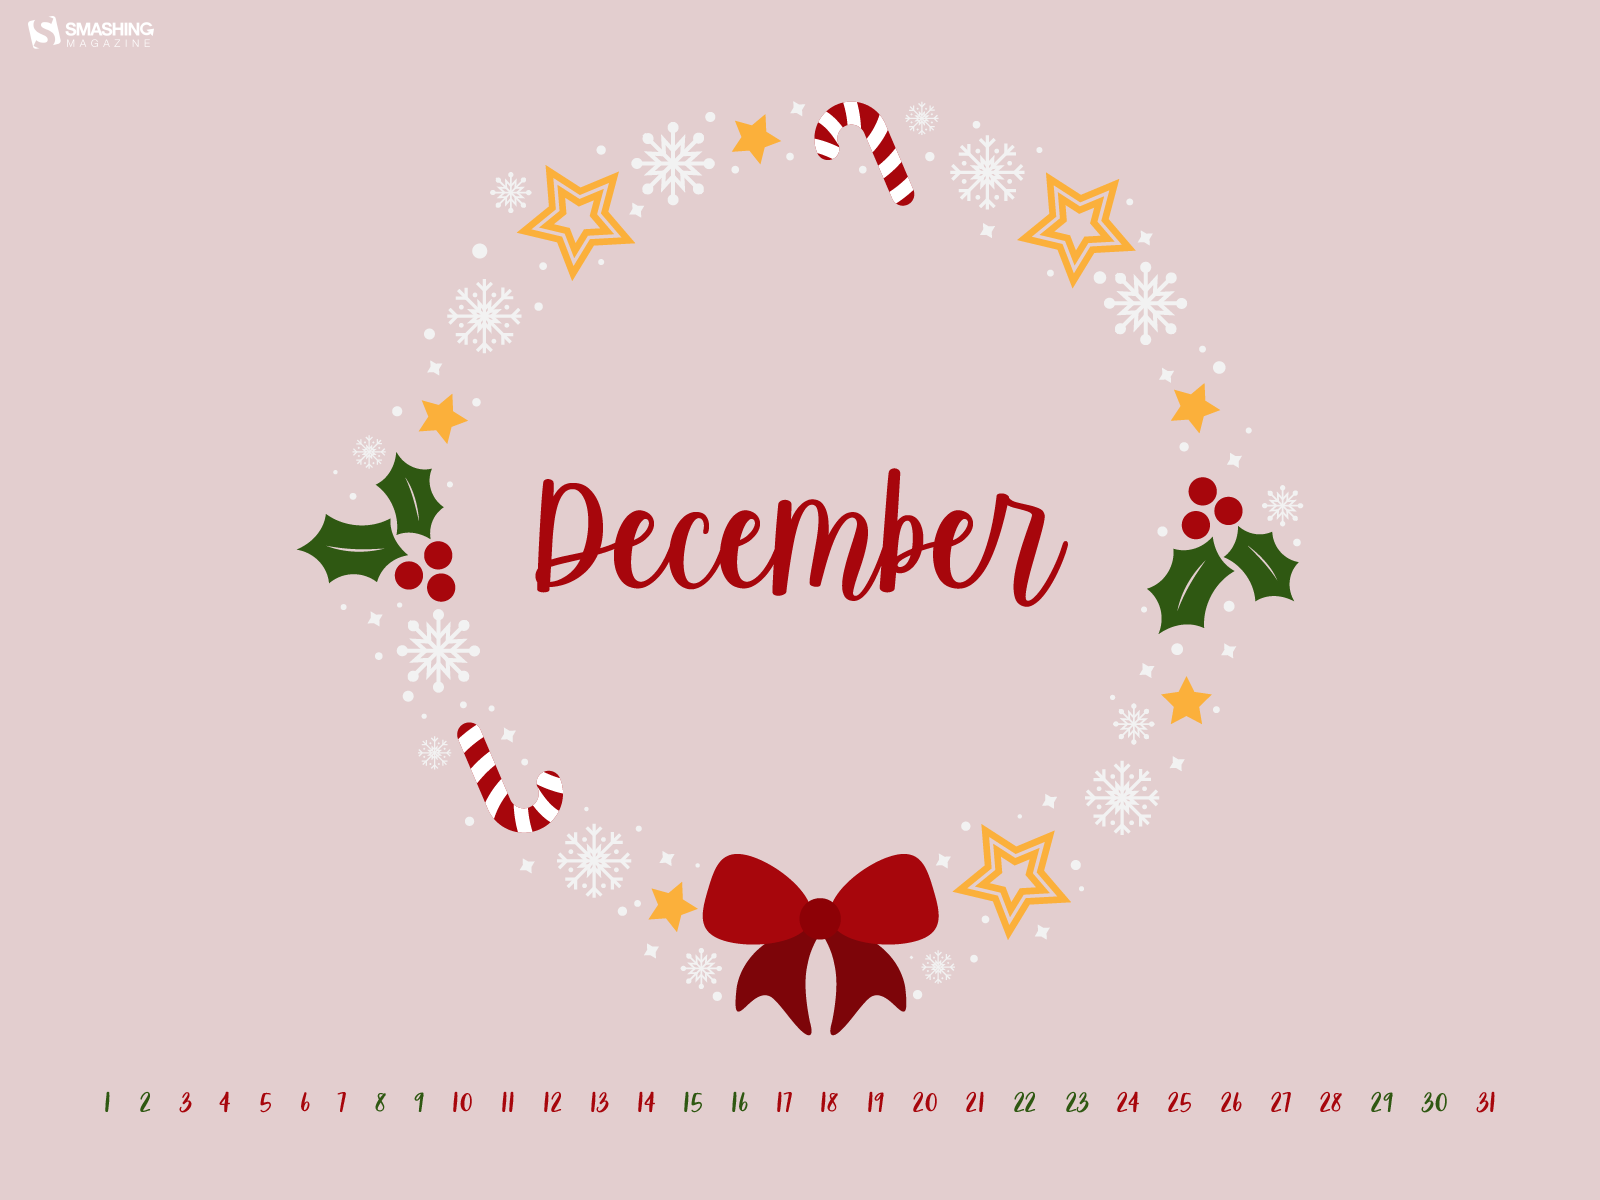 It's Beginning To Look A Lot Like December (2018 Wallpaper Edition)